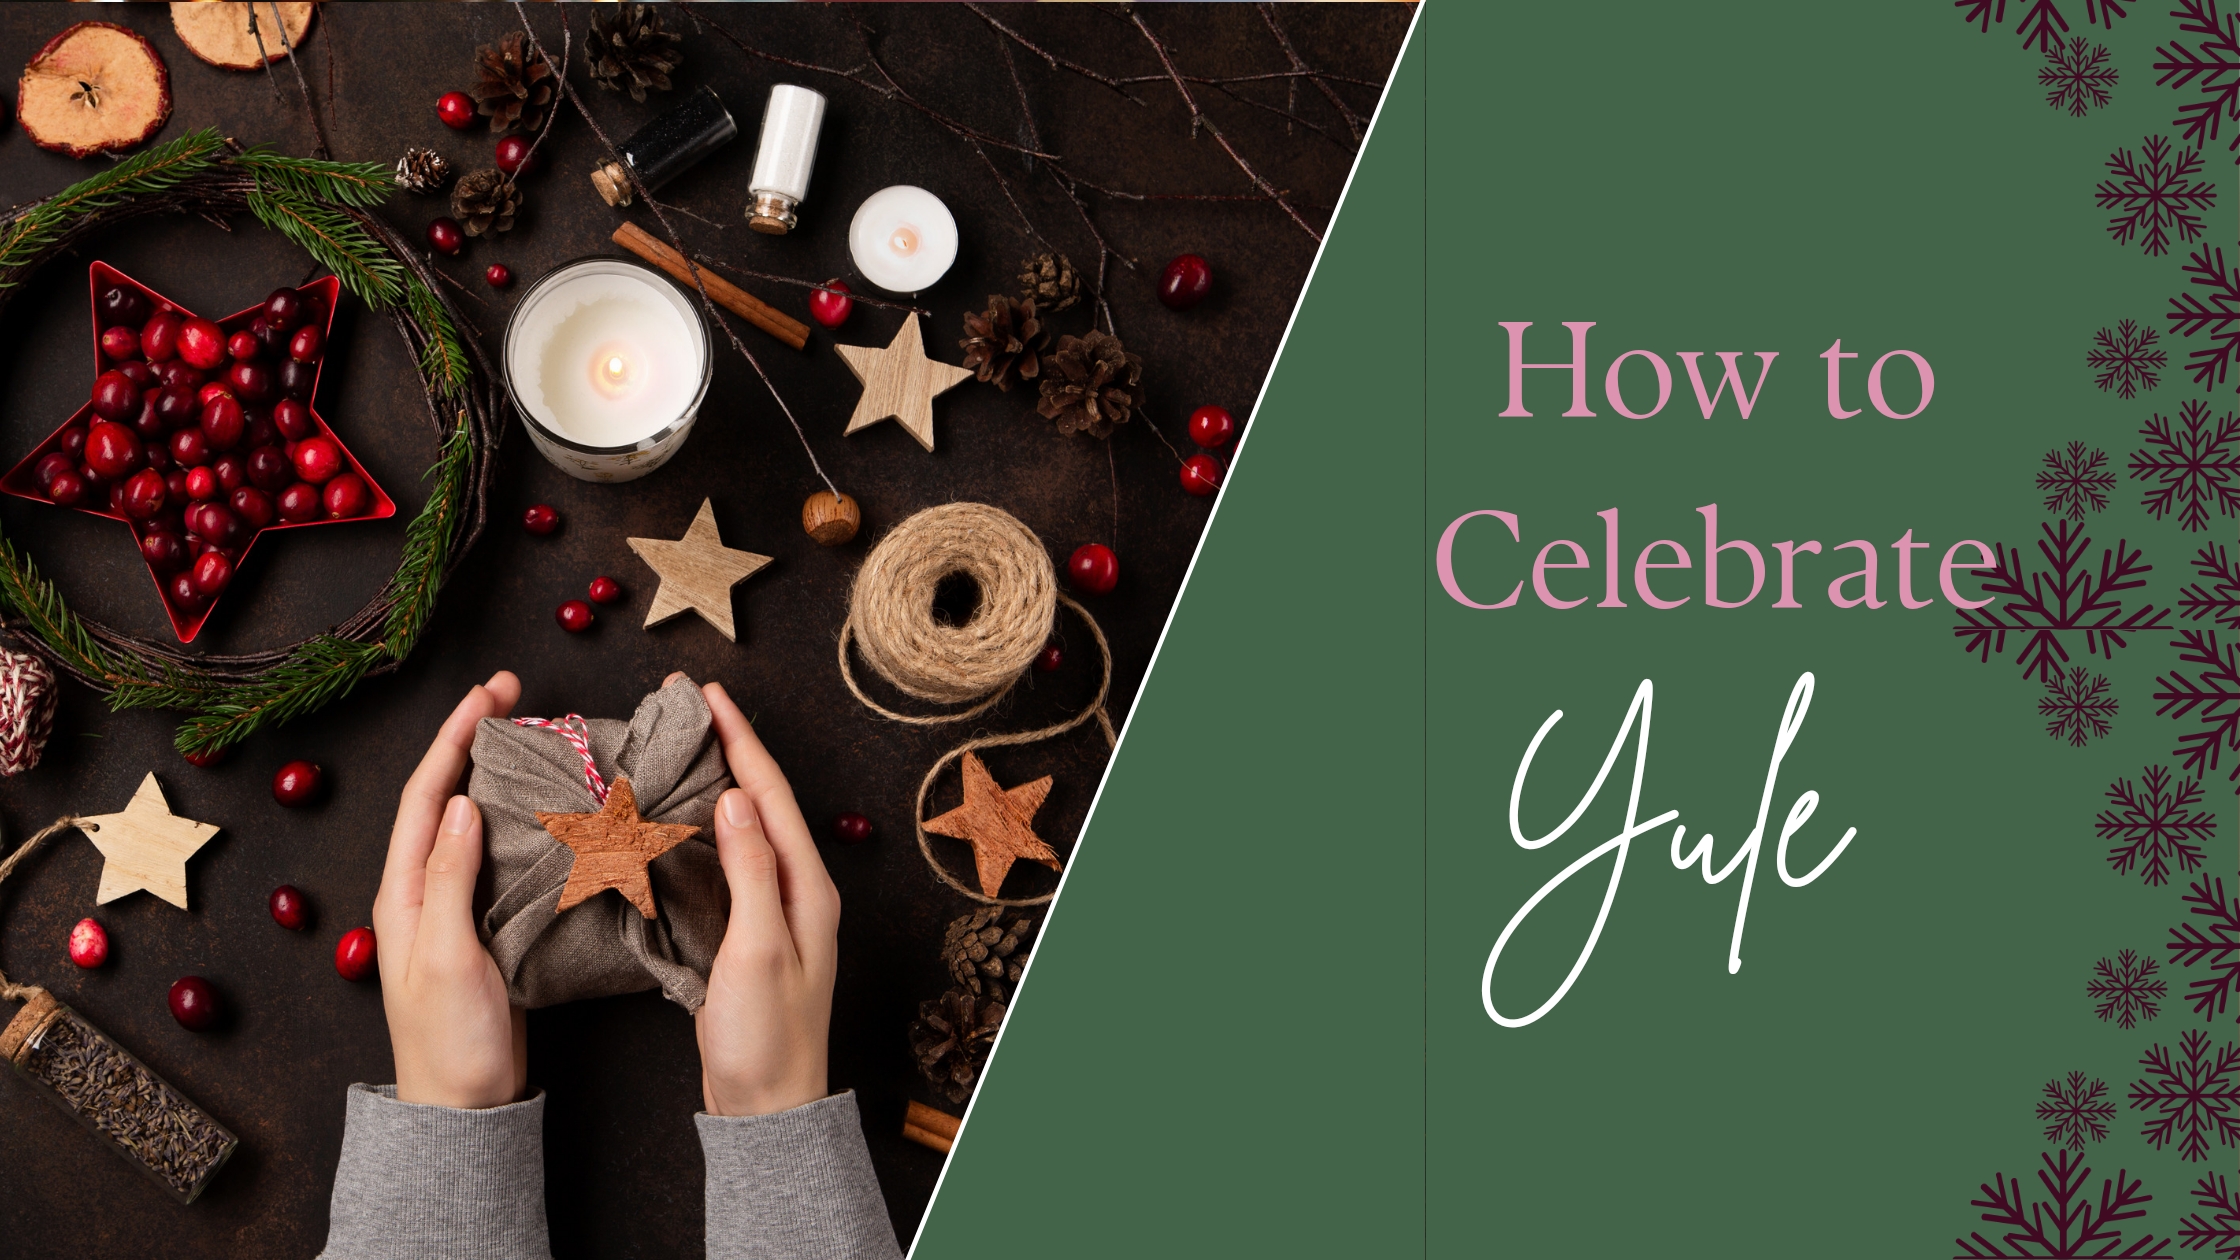 How to Celebrate a Witchy Yule